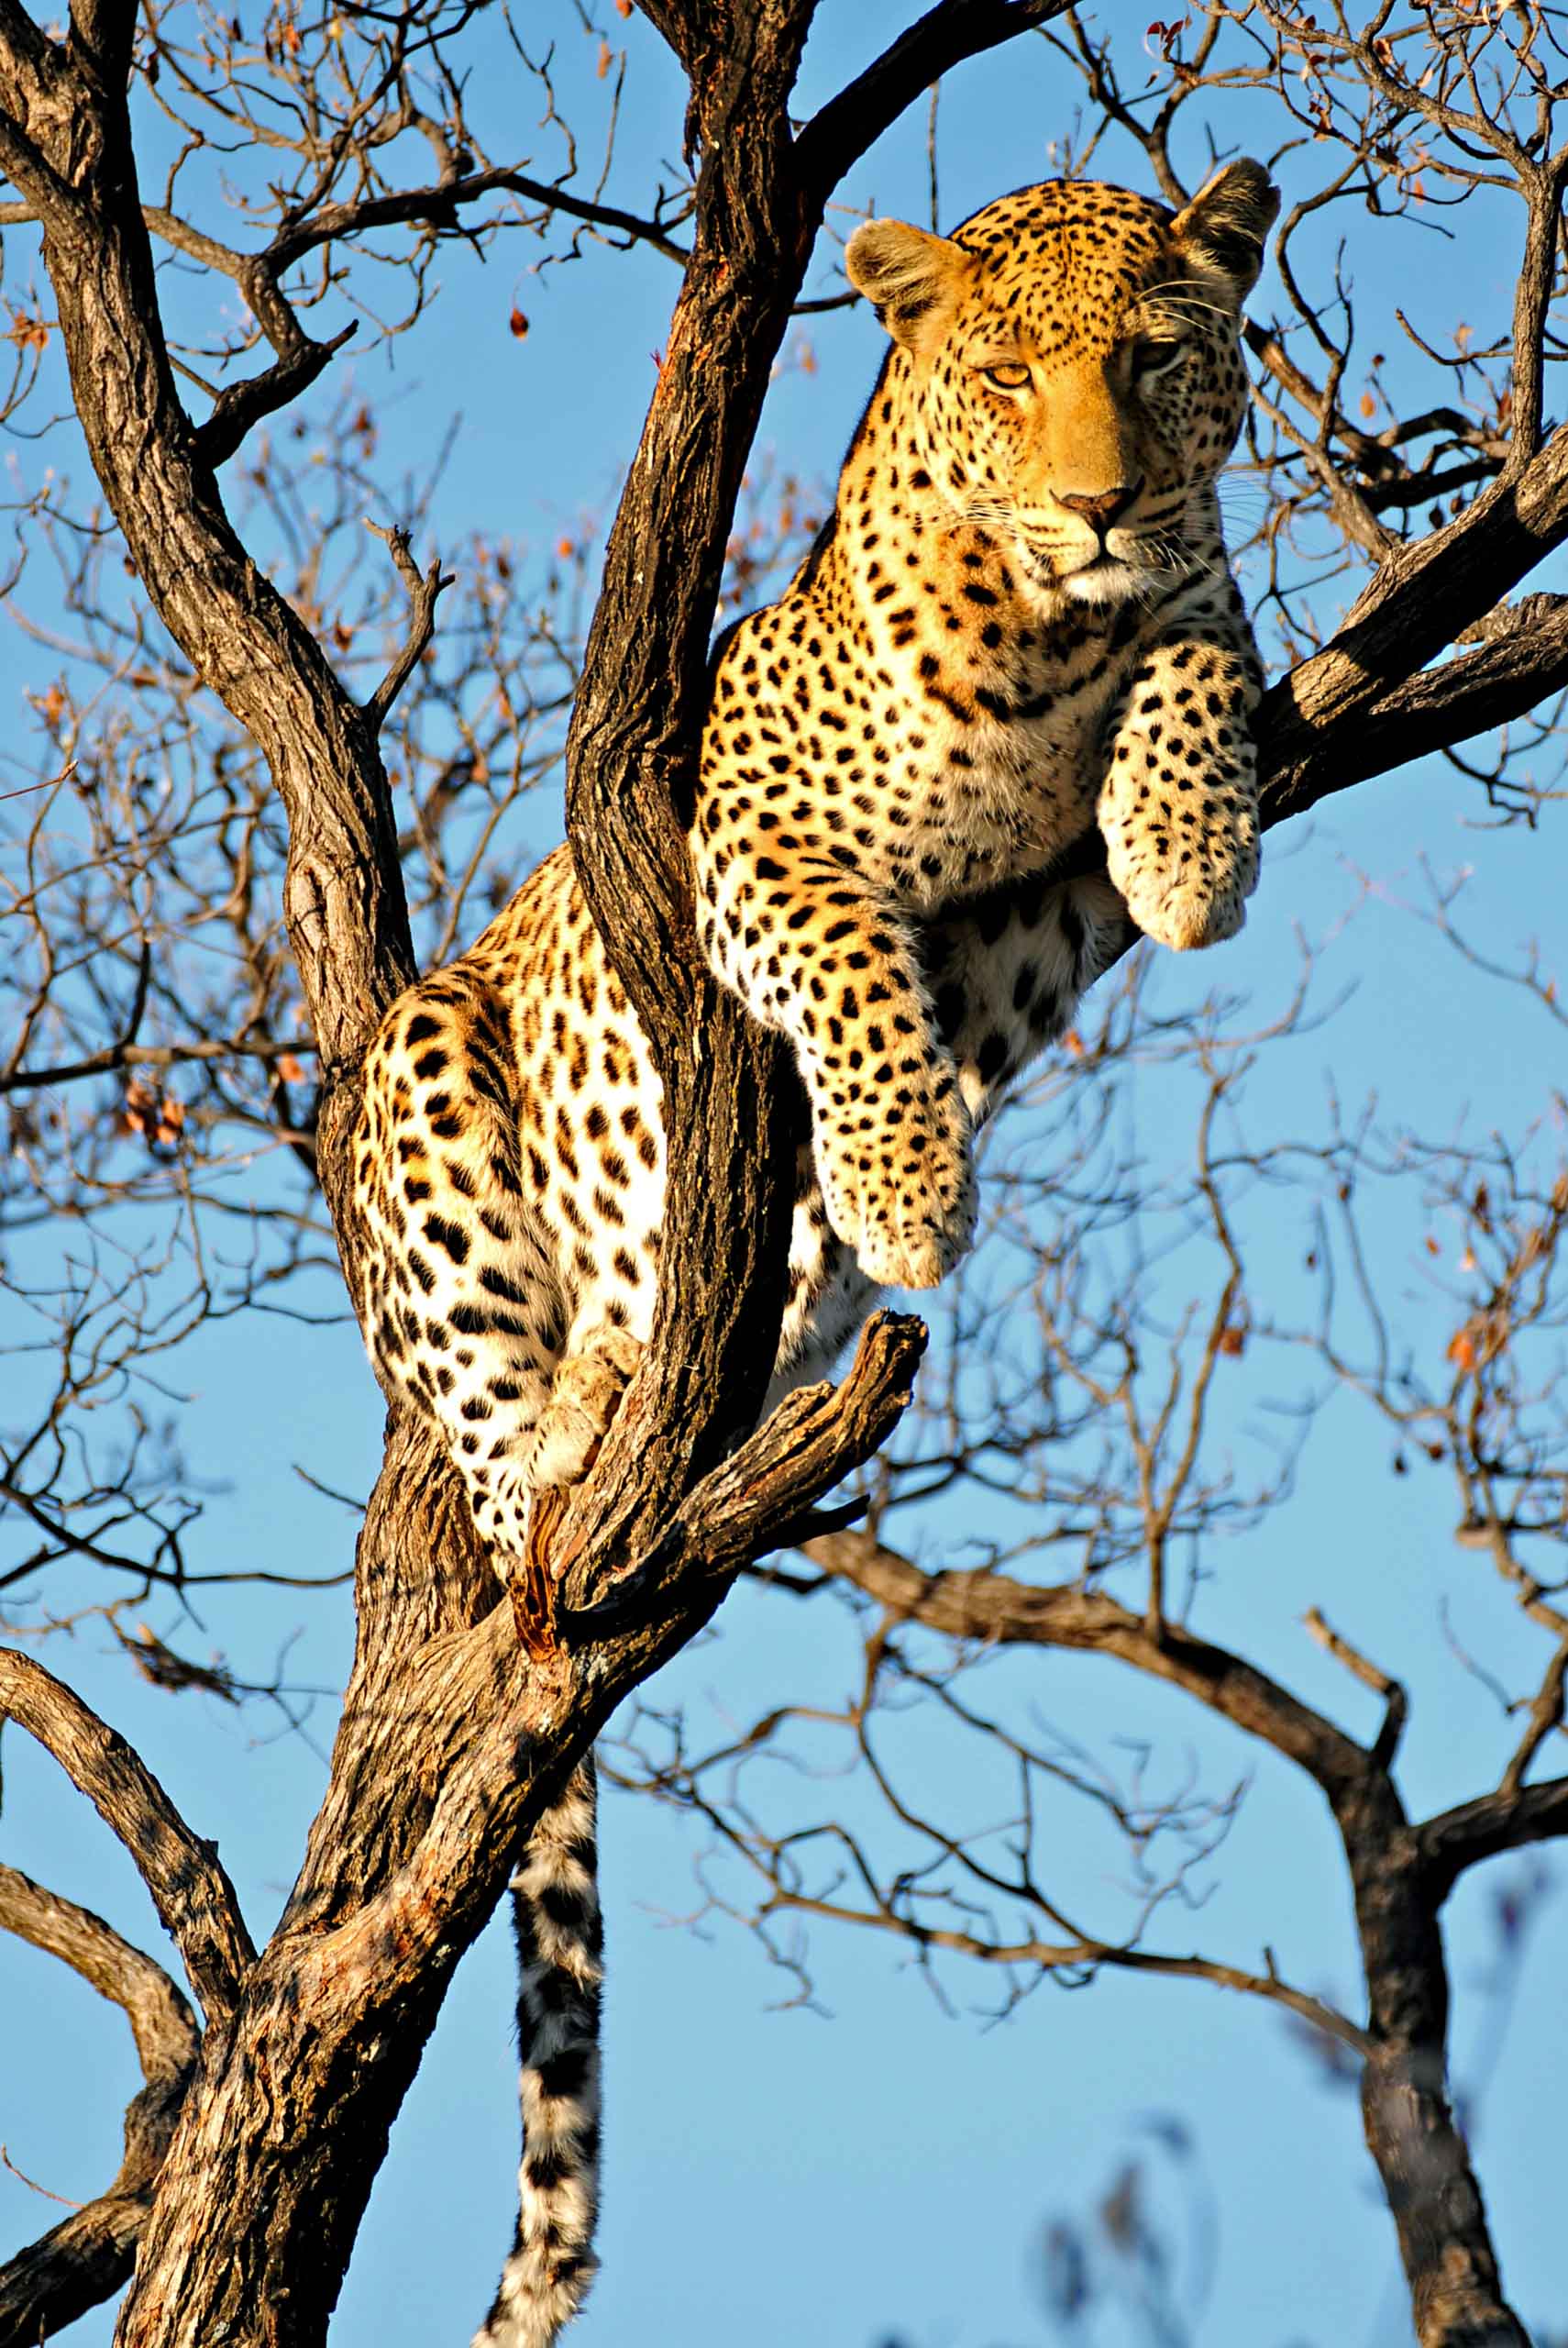 A leopard in a tree.